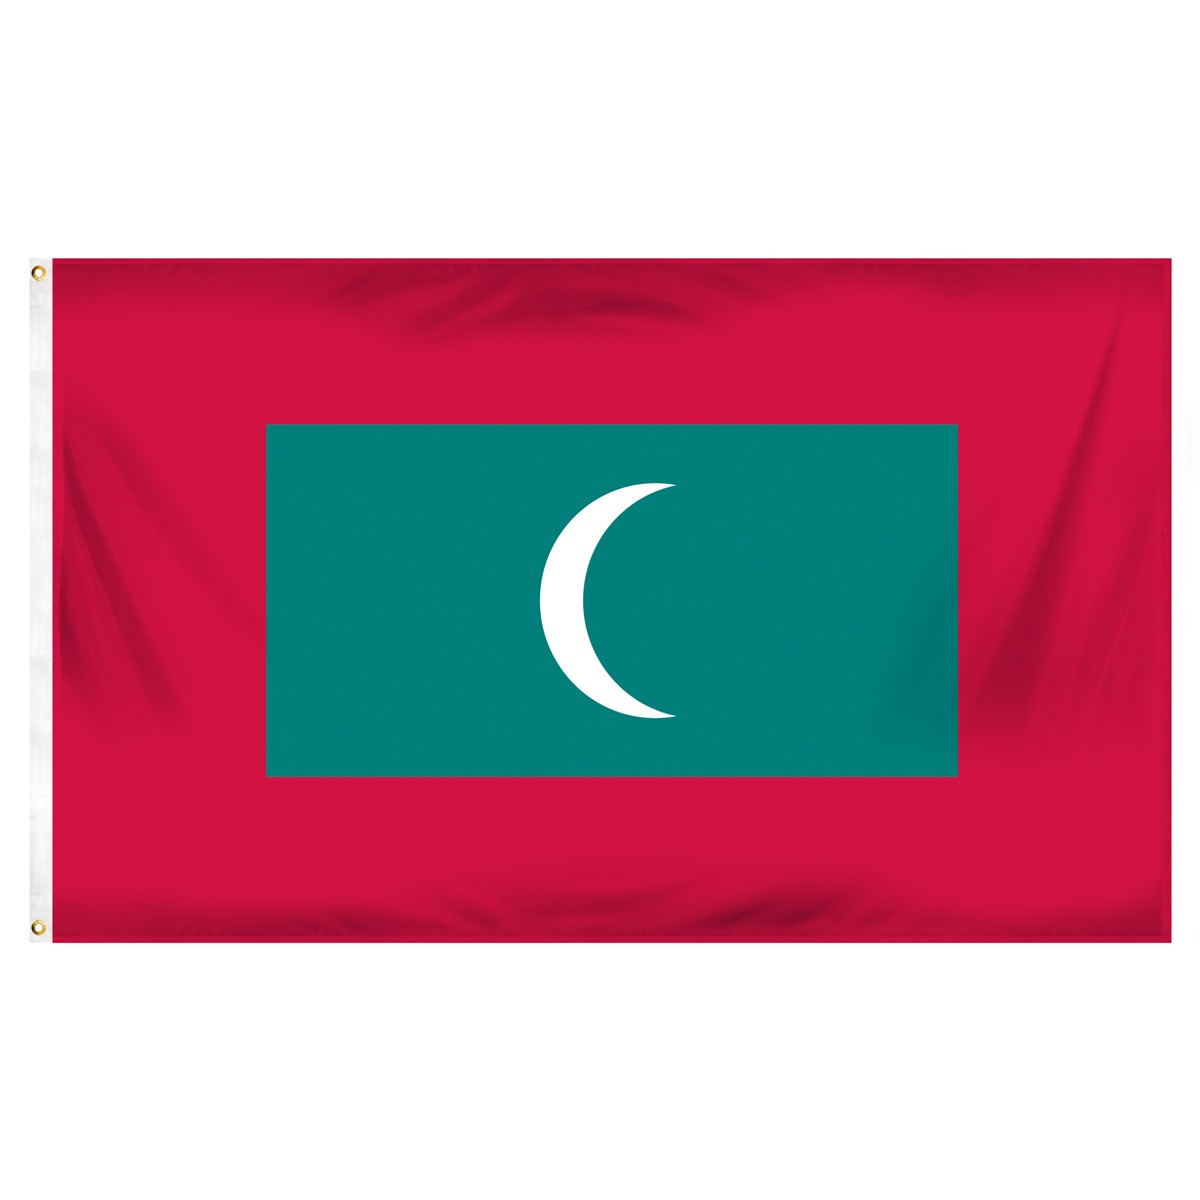 Maldives Submit Flags and Flags